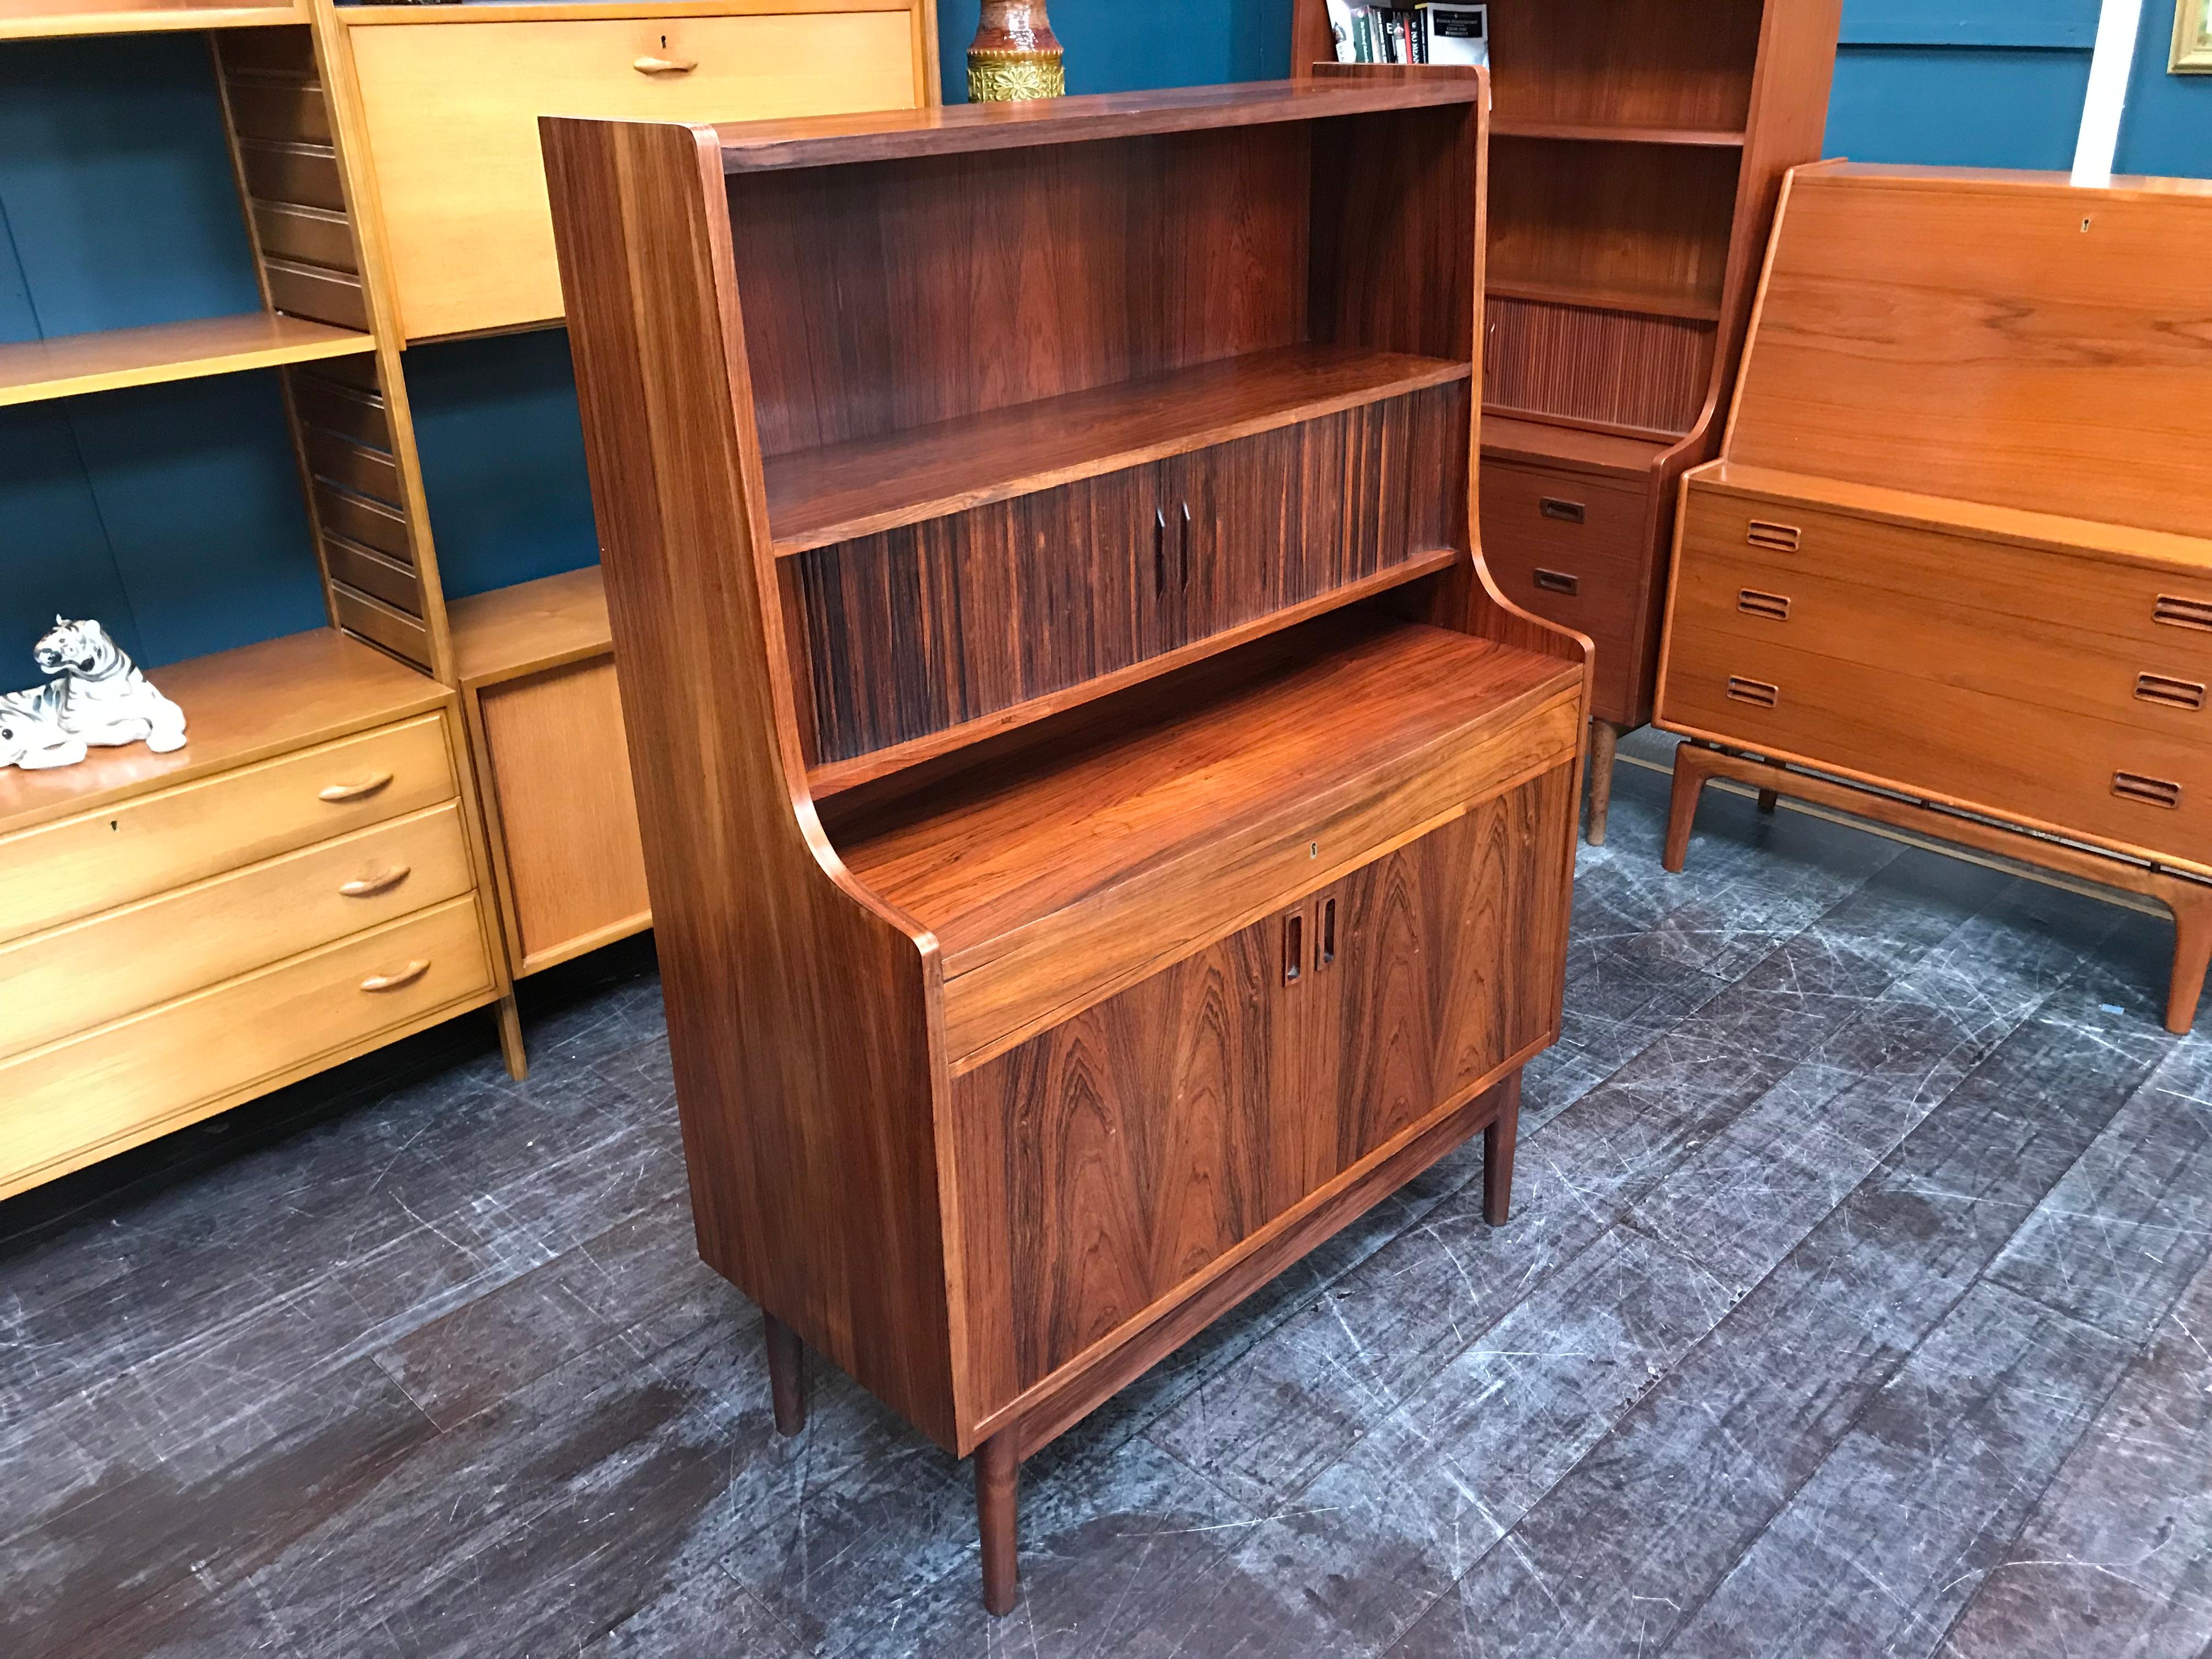 This stunning rosewood desk is an elegant offering from one of Denmark’s finest furniture makers. This high secretaire was designed in the 1960s, probably by Johannes Sorth. It features a shelved cupboard space, a pull-out desktop above the